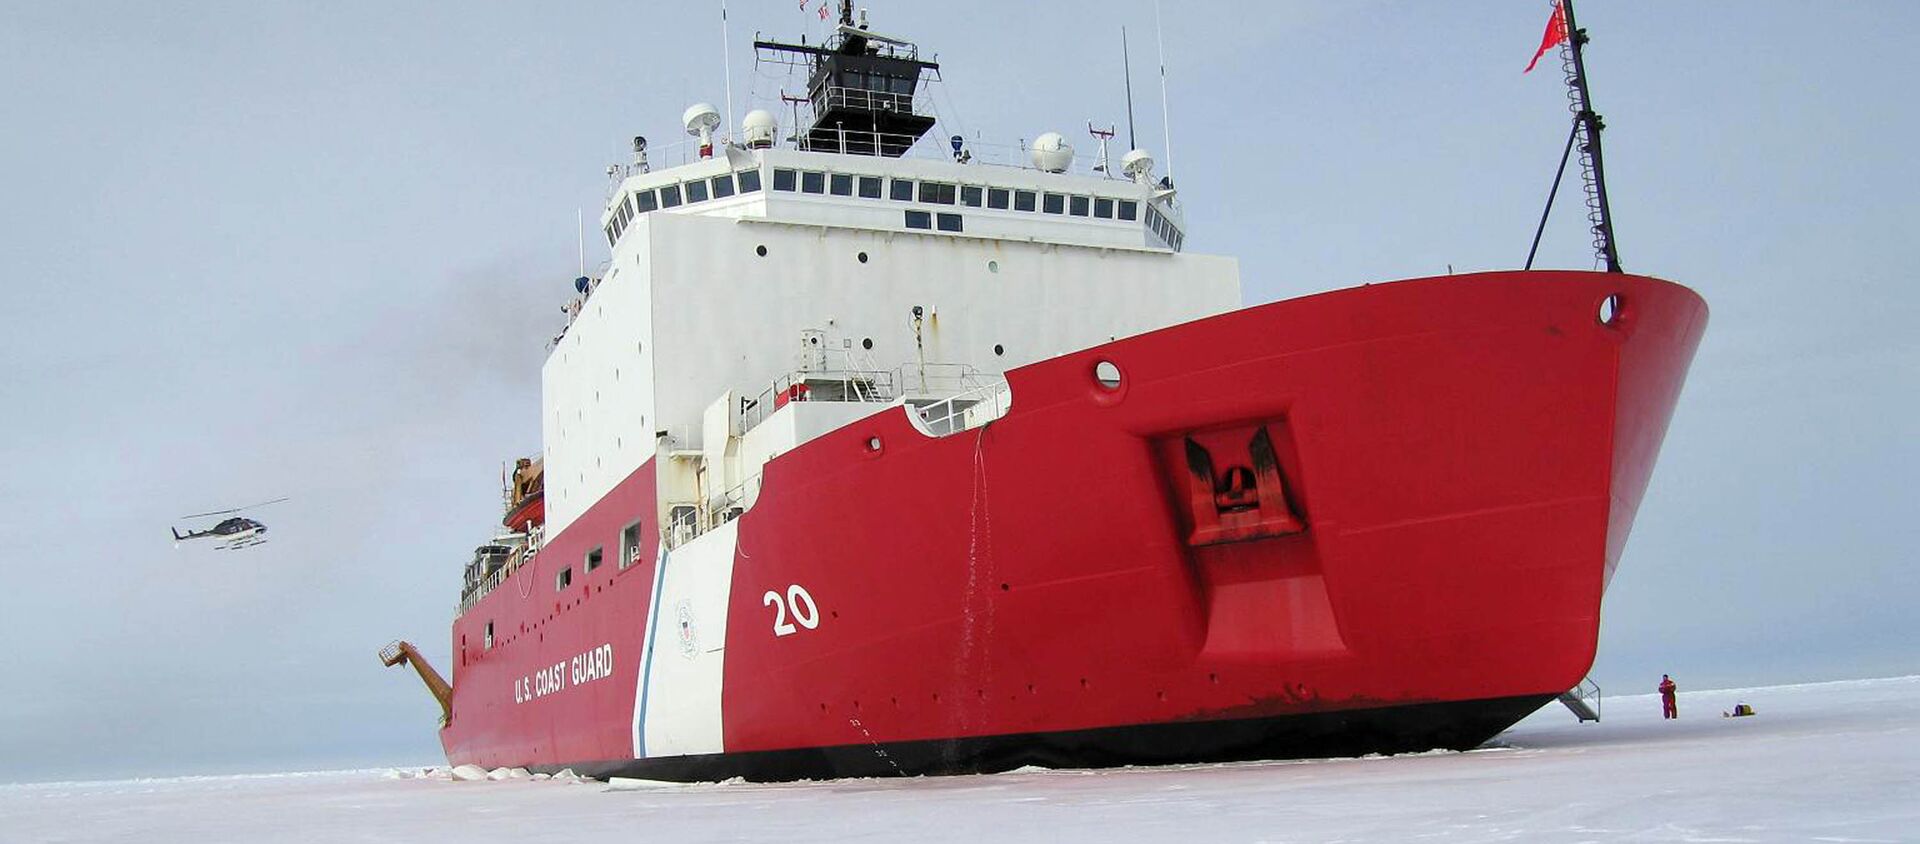 420-foot (128m) Coast Guard cutter Healy the largest and most technically advanced icebreaker in the US - Sputnik International, 1920, 29.06.2021